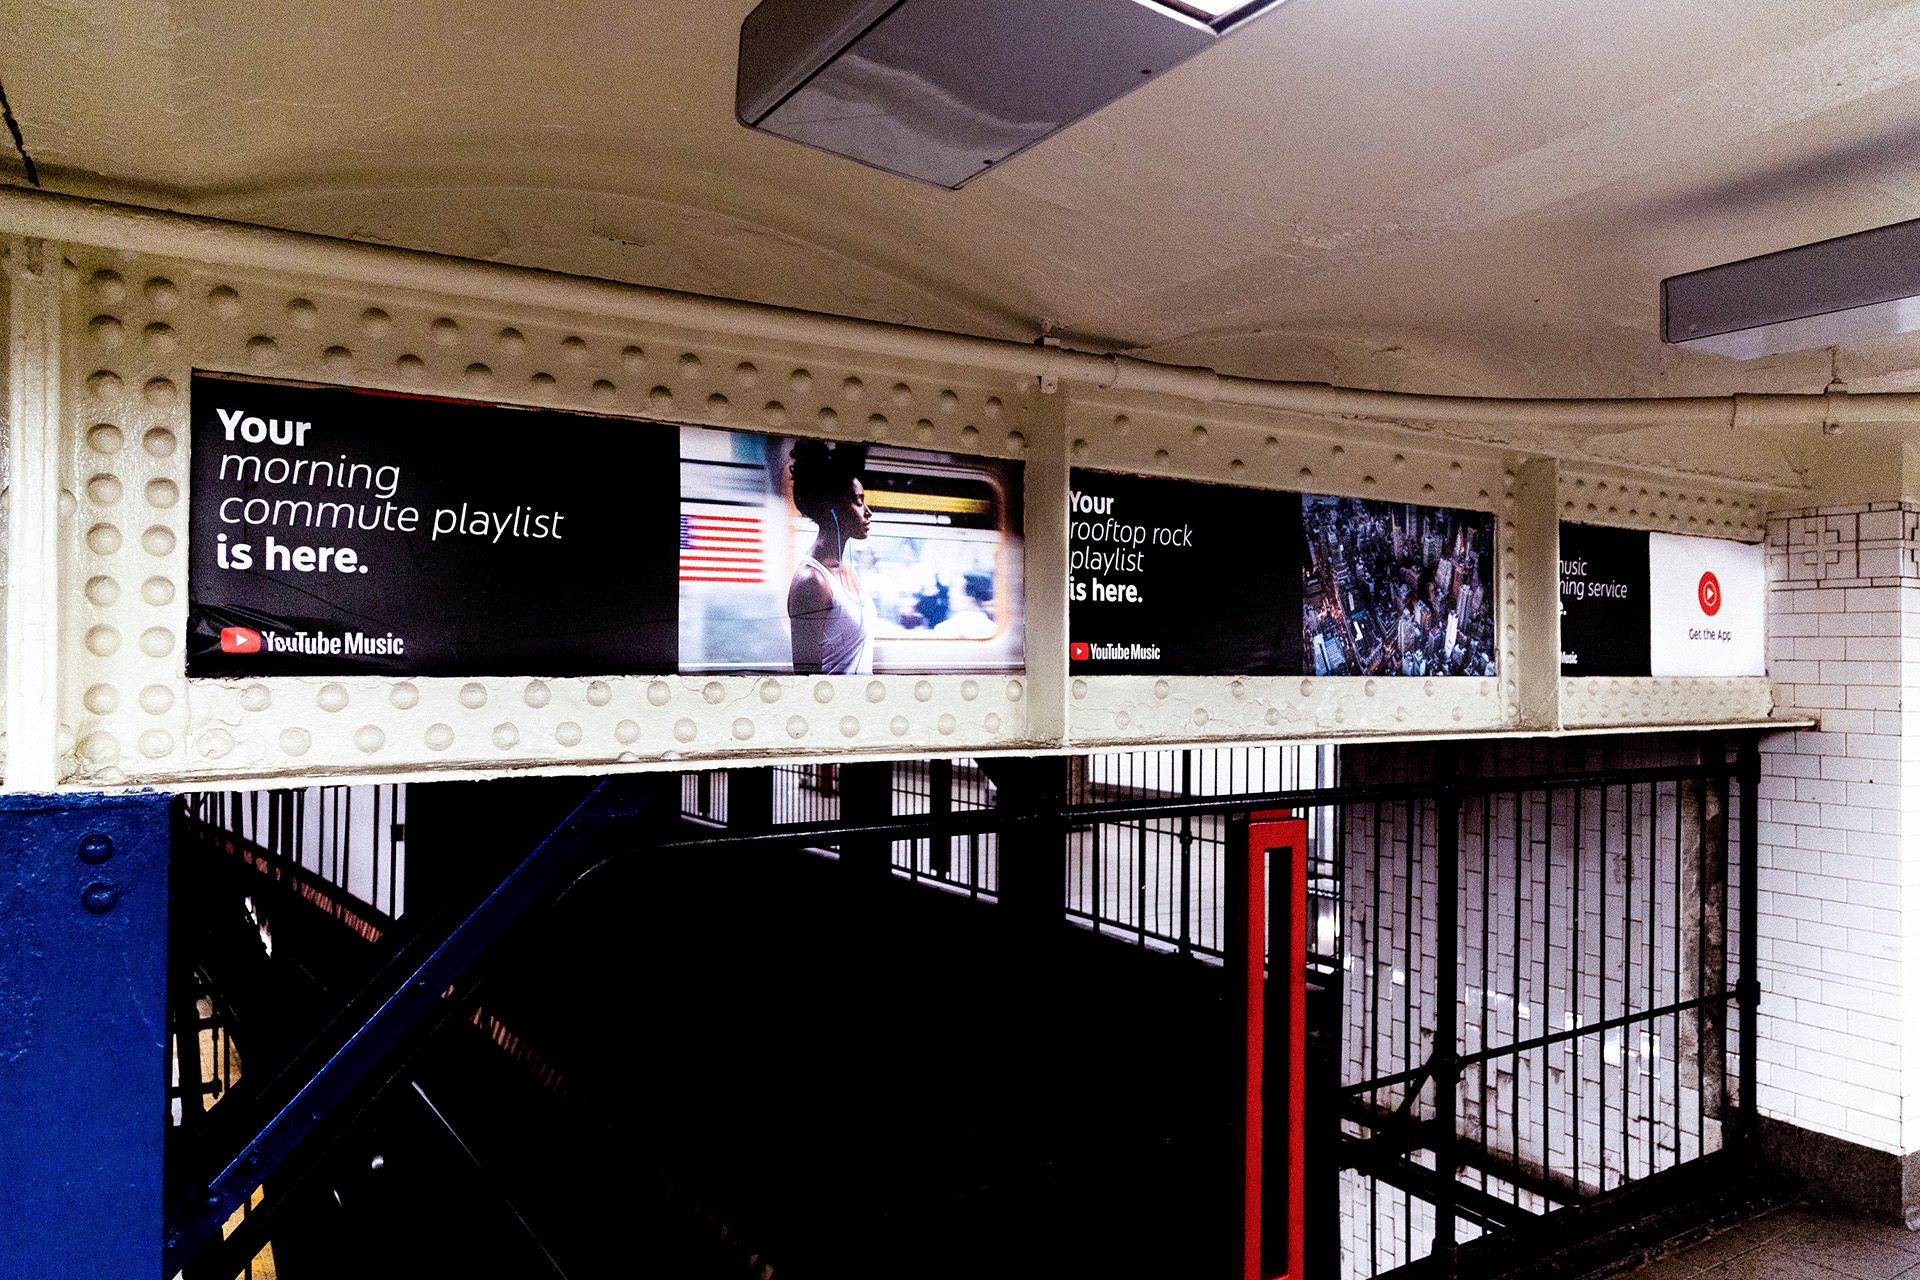 YouTube Music ads above entrance to Union Square train station. Your morning commute playlist is here.